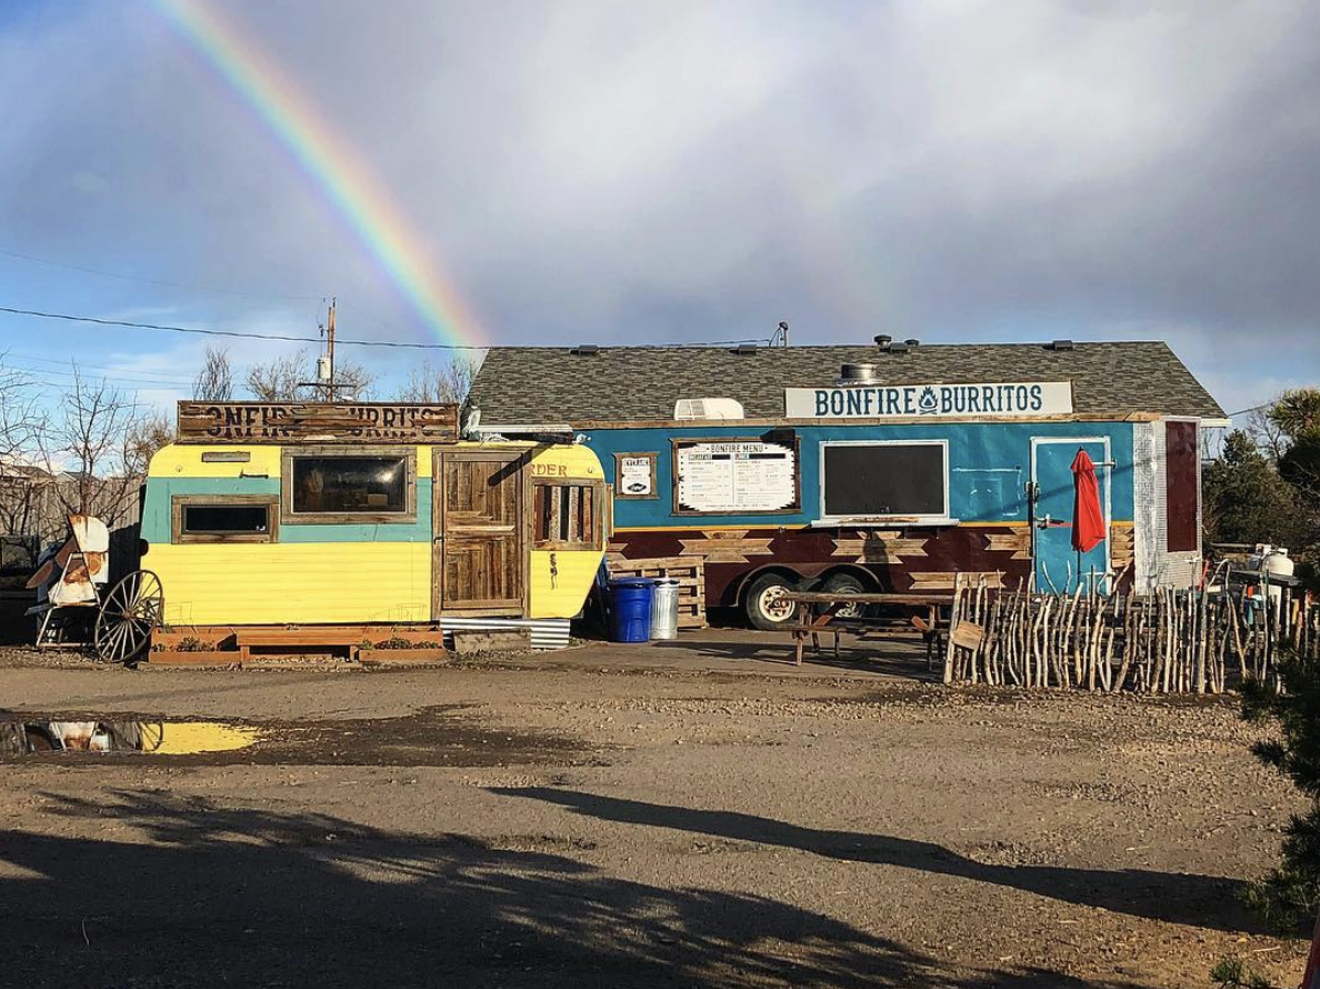 What started as a tiny yellow burrito trailer has grown into what will soon become a full-fledged restaurant.